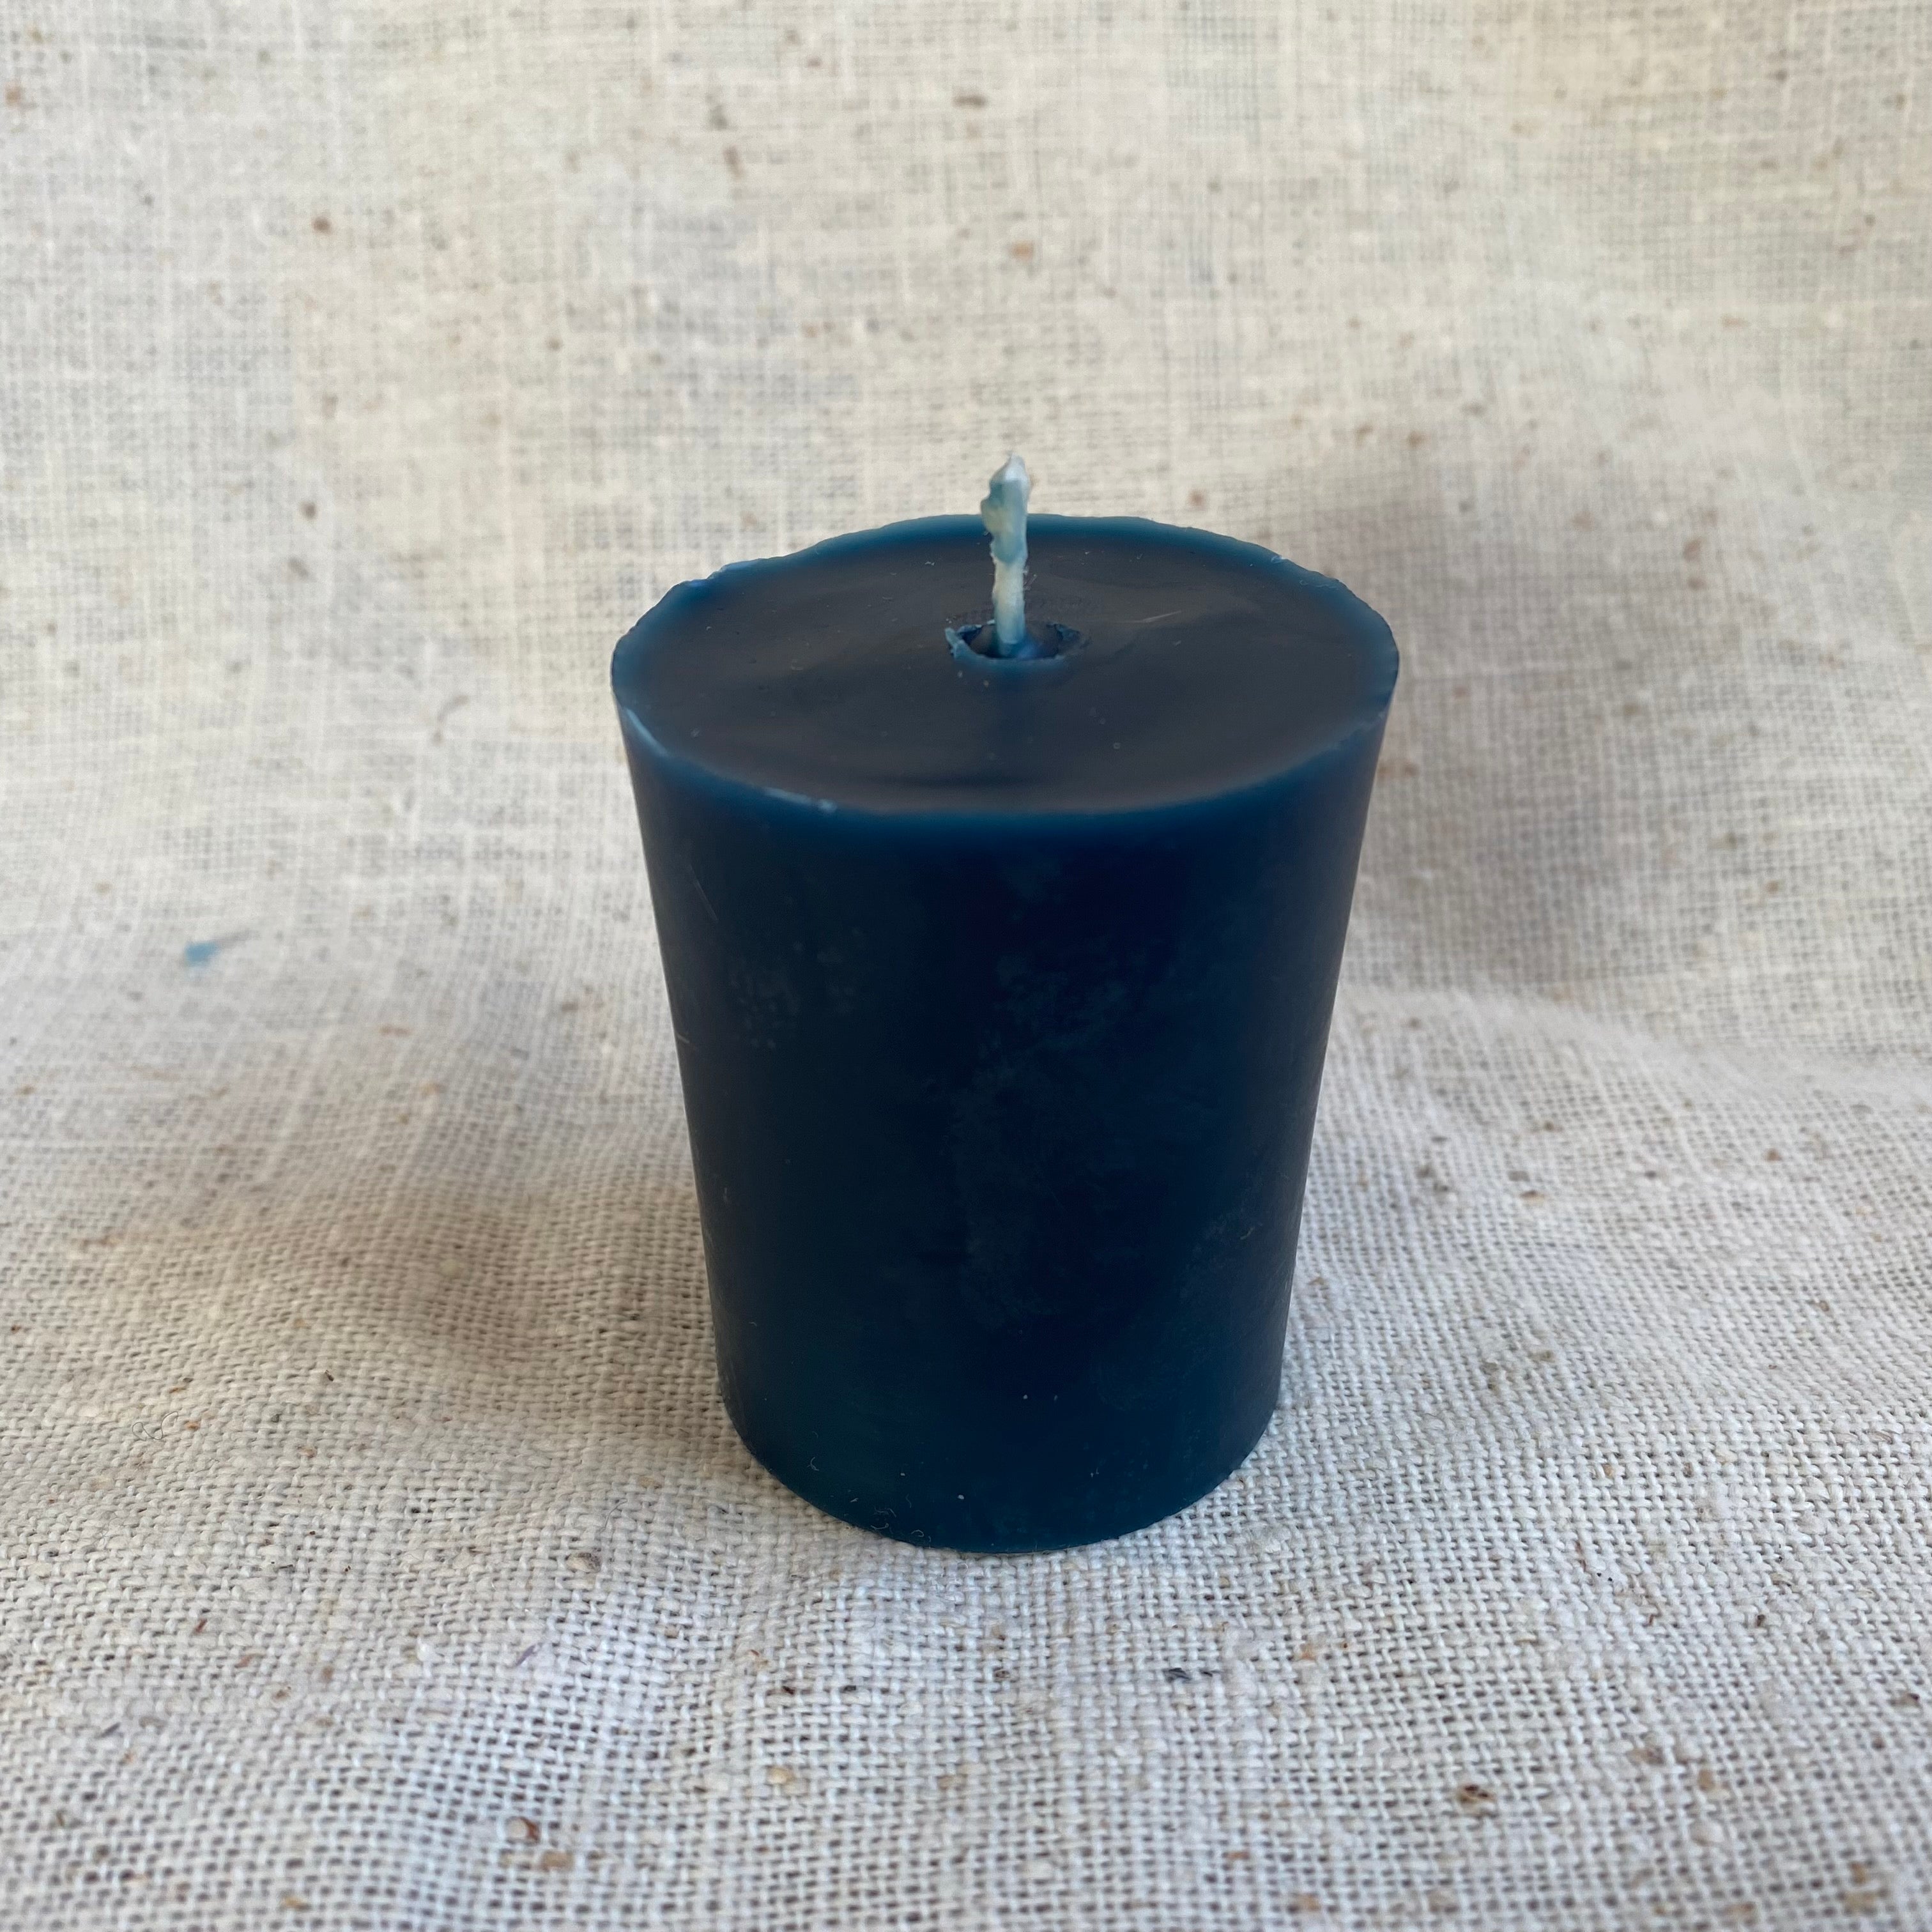 Votive Candle - 2 inch